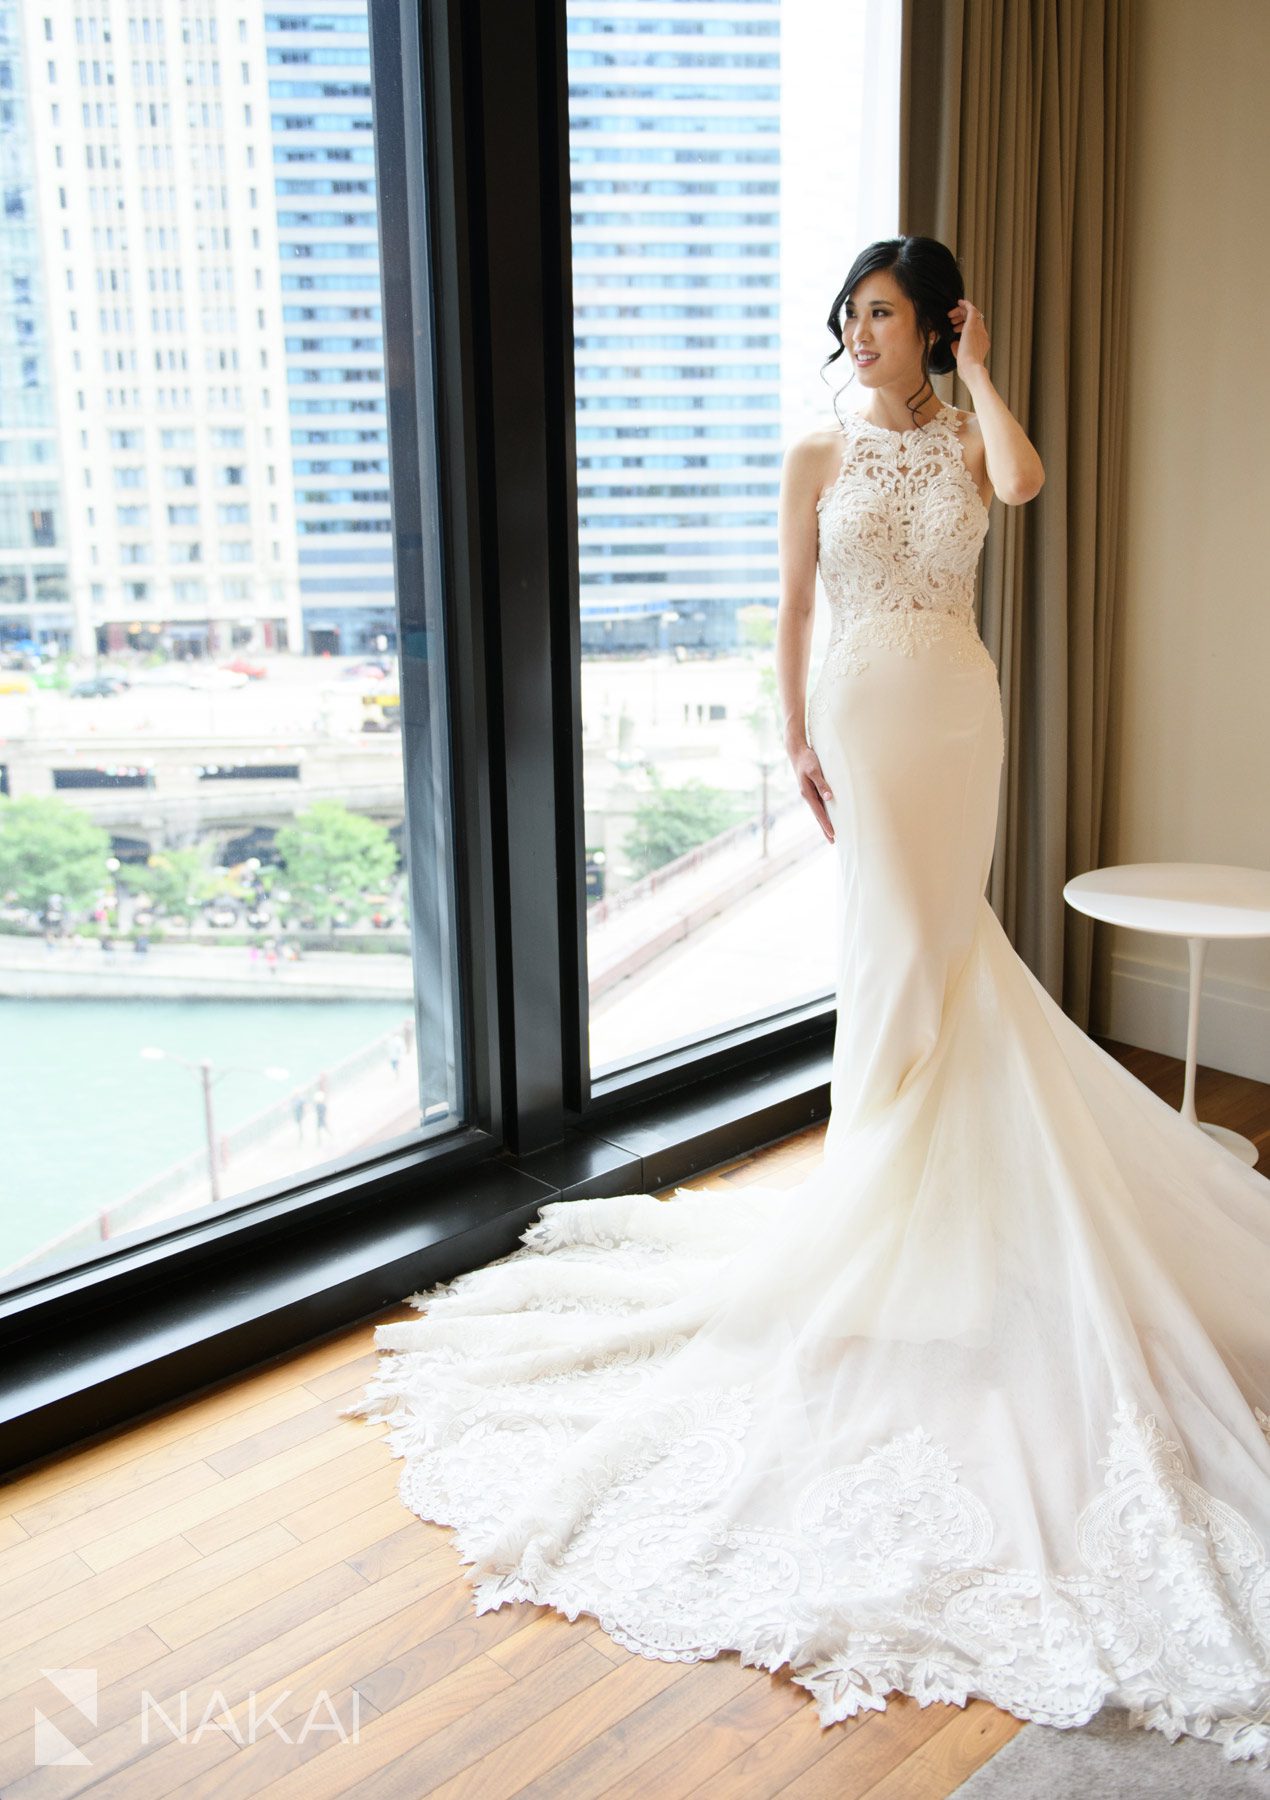 Langham Chicago wedding images getting ready details